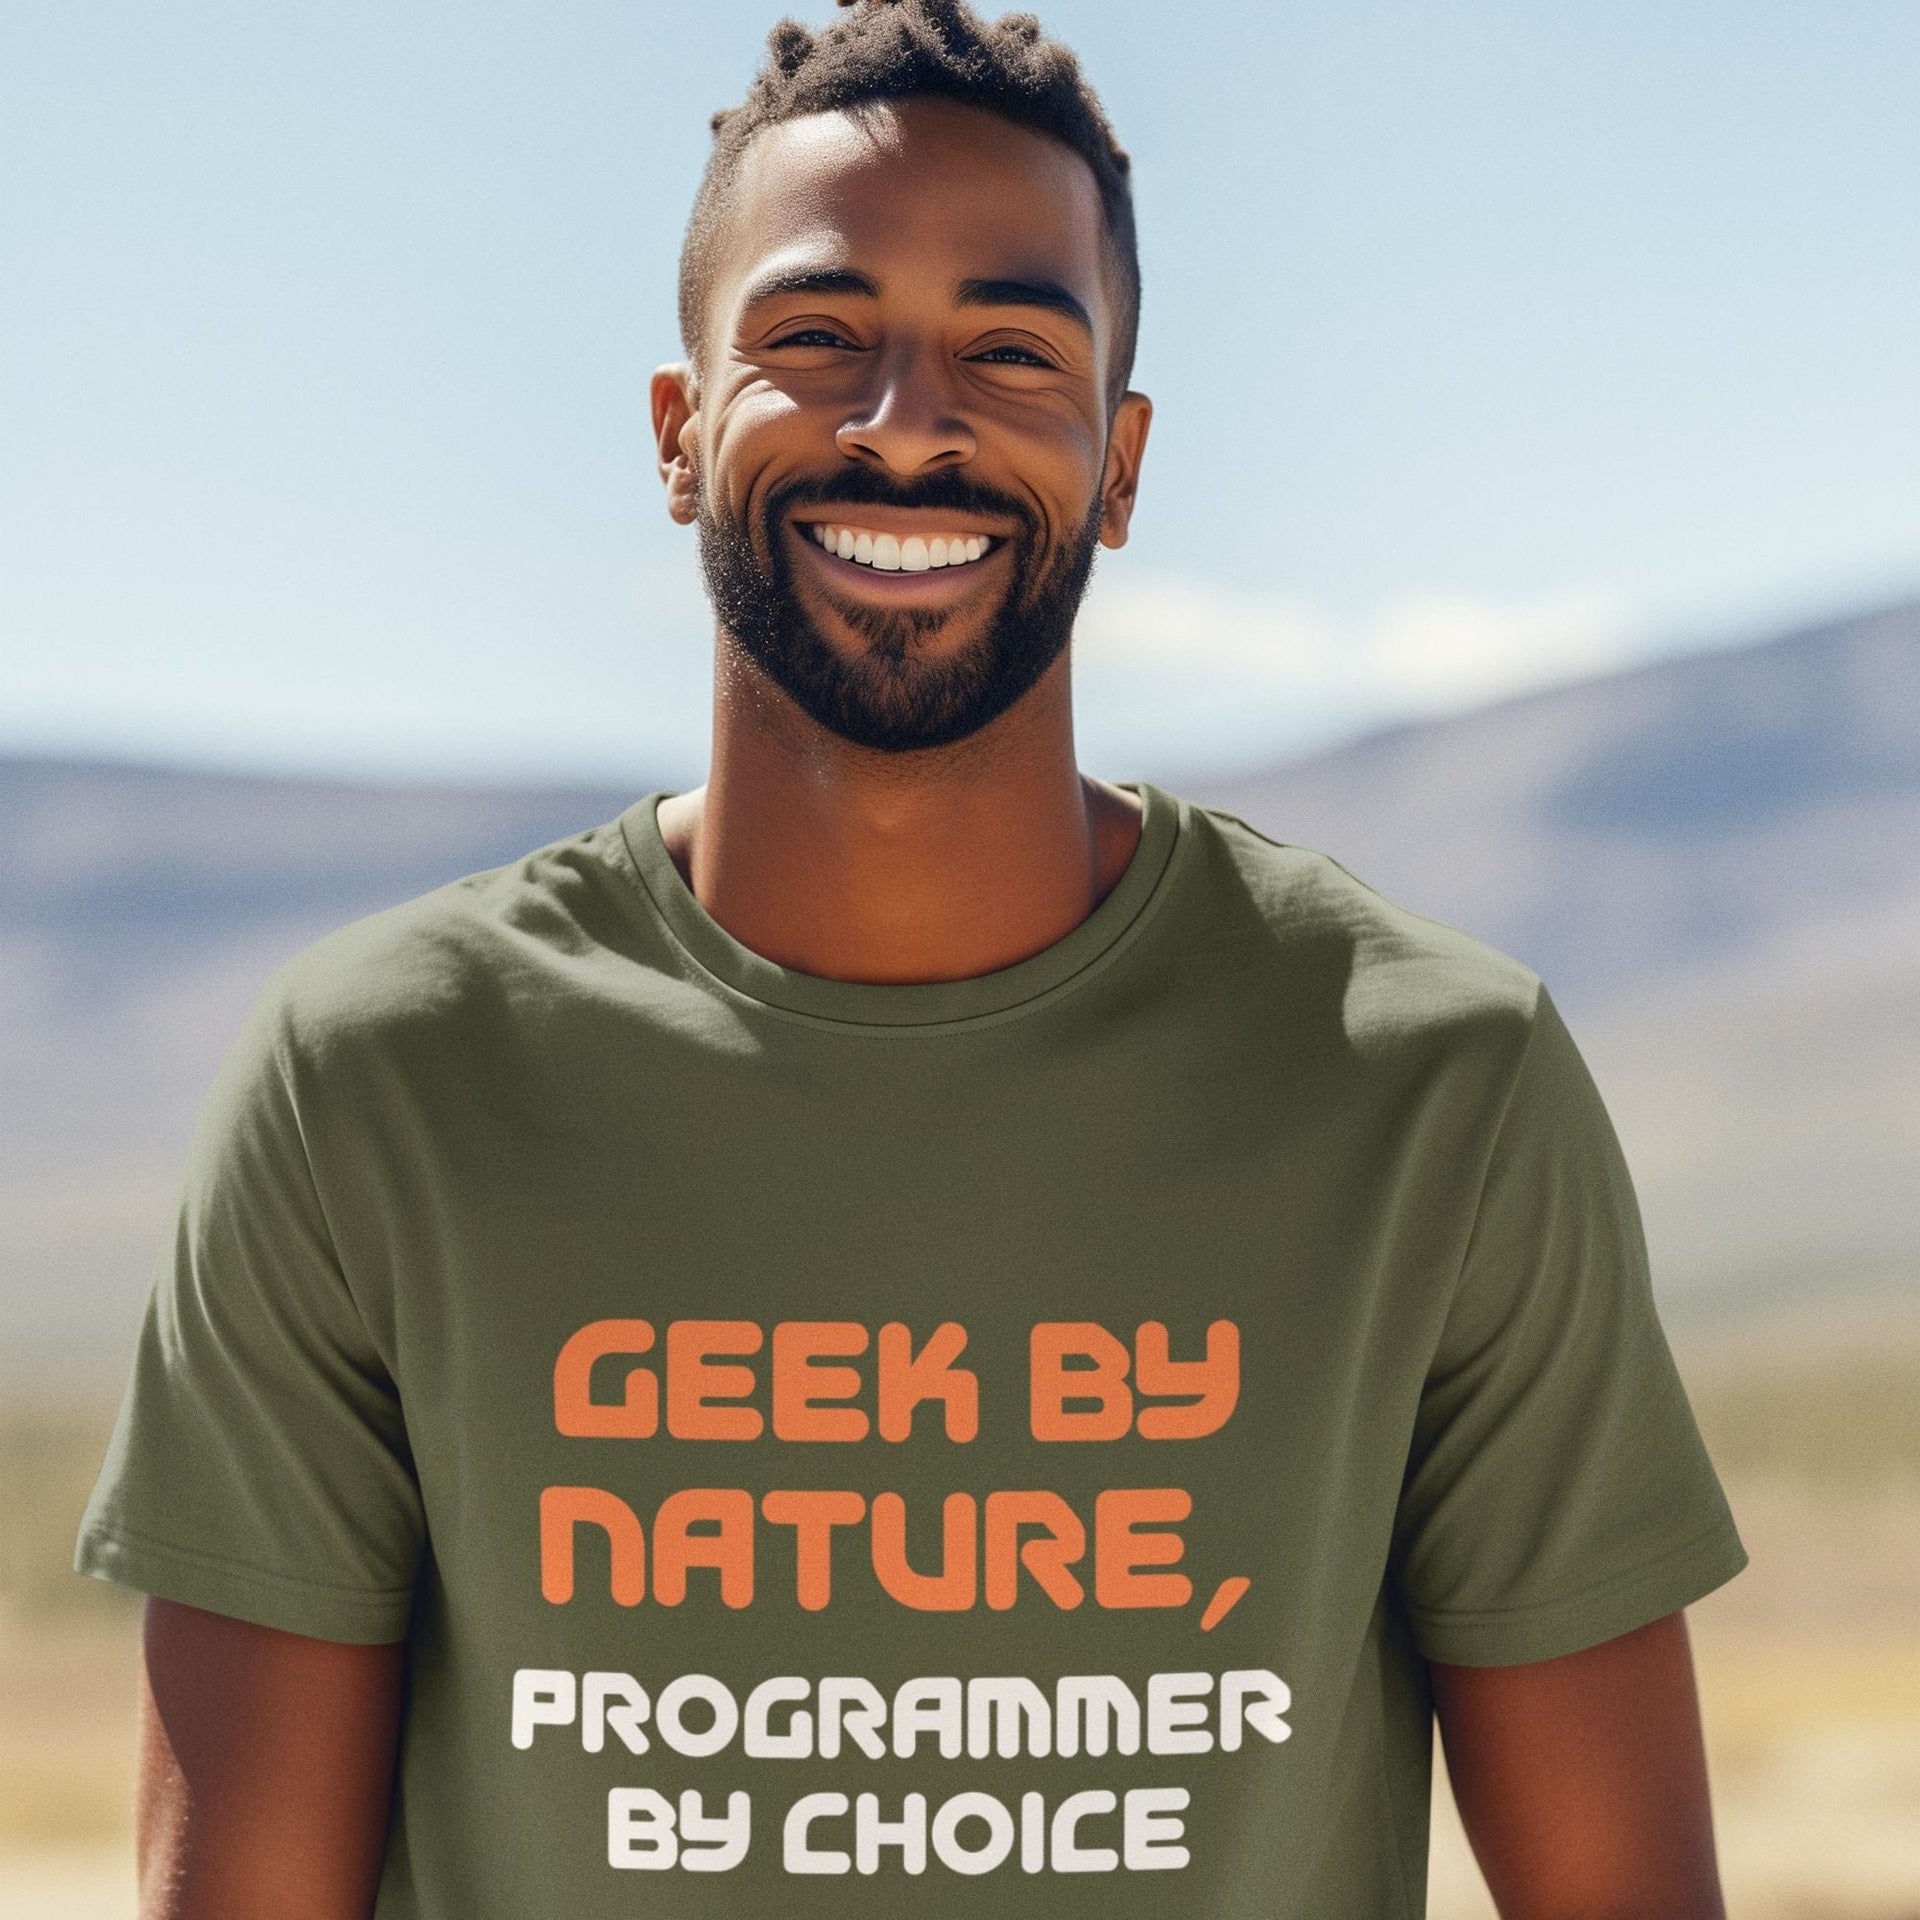 Geek by Nature, Programmer by Choice - Men's T-Shirt